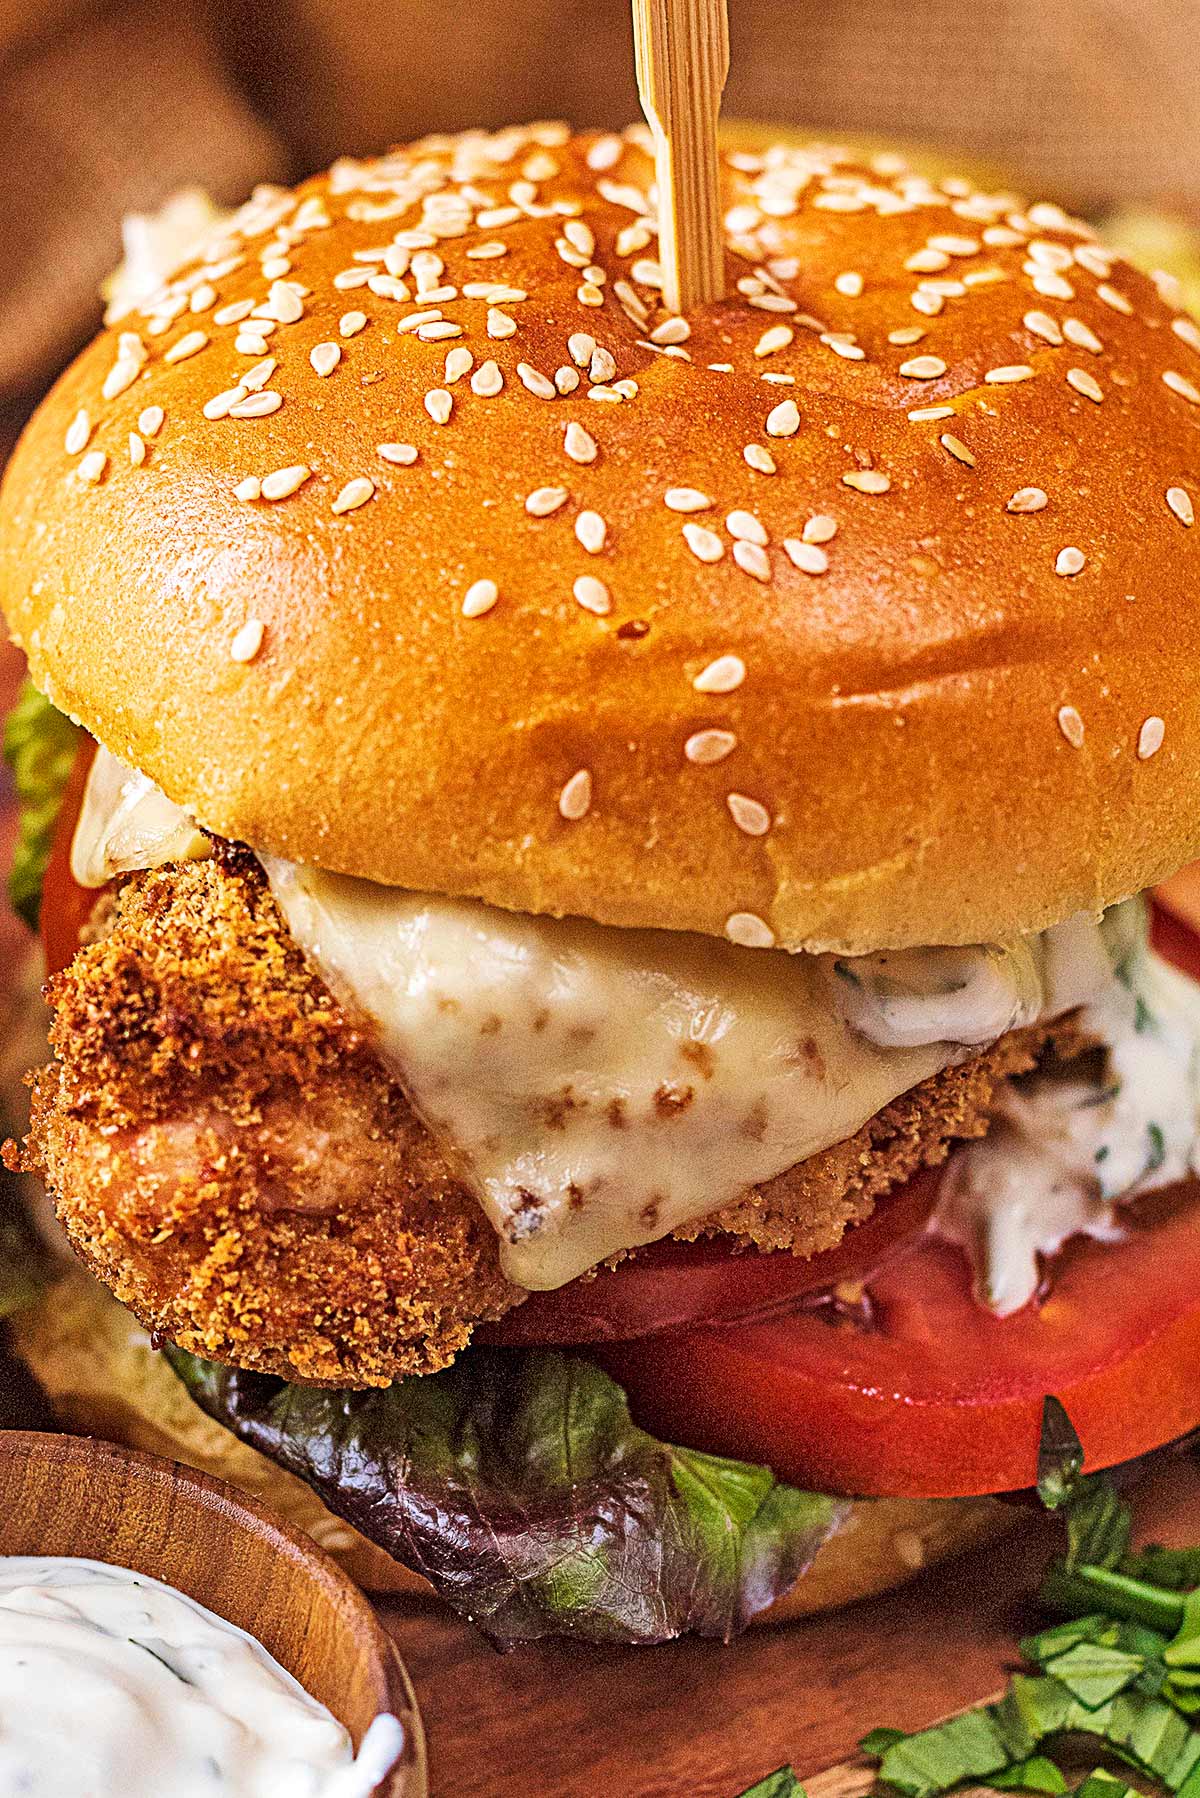 Breaded chicken topped with cheese in a sesame seed brioche bun with lettuce and tomato.